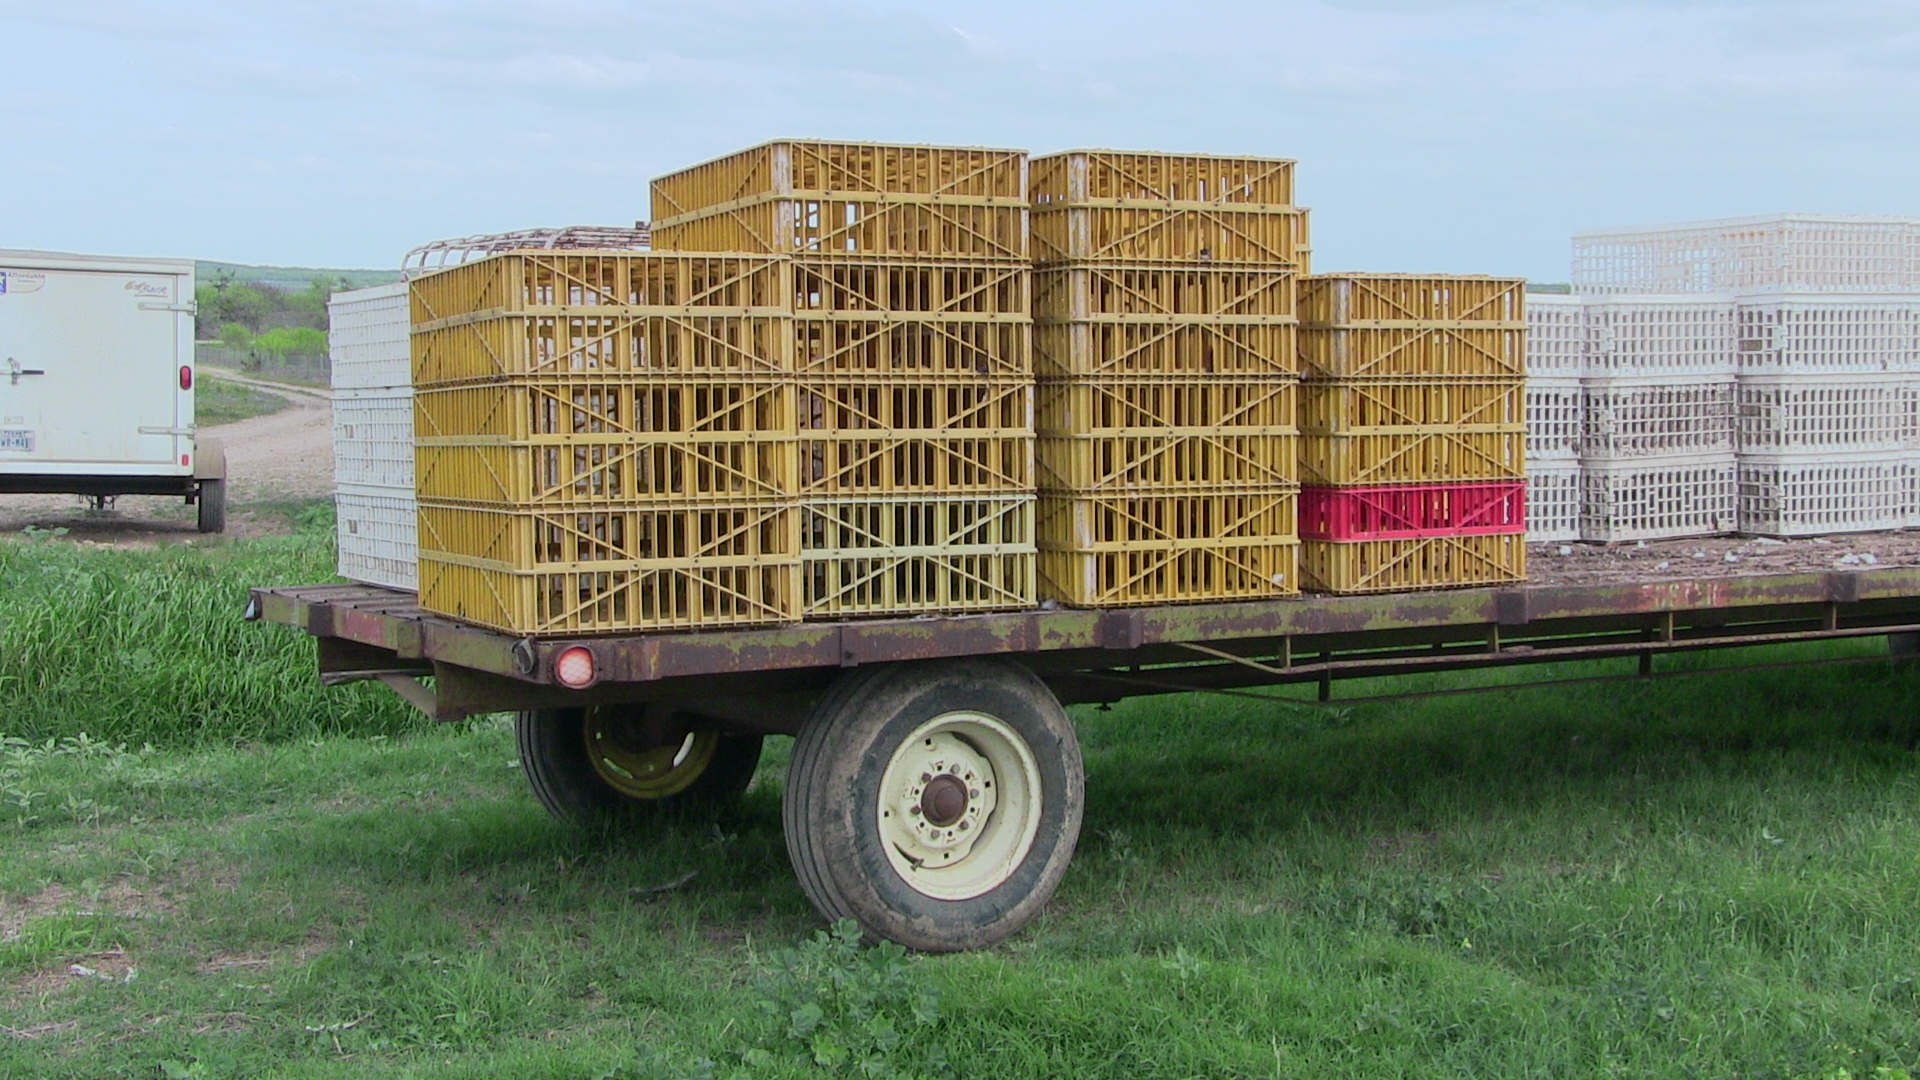 Flatbed trailers with plastic coops